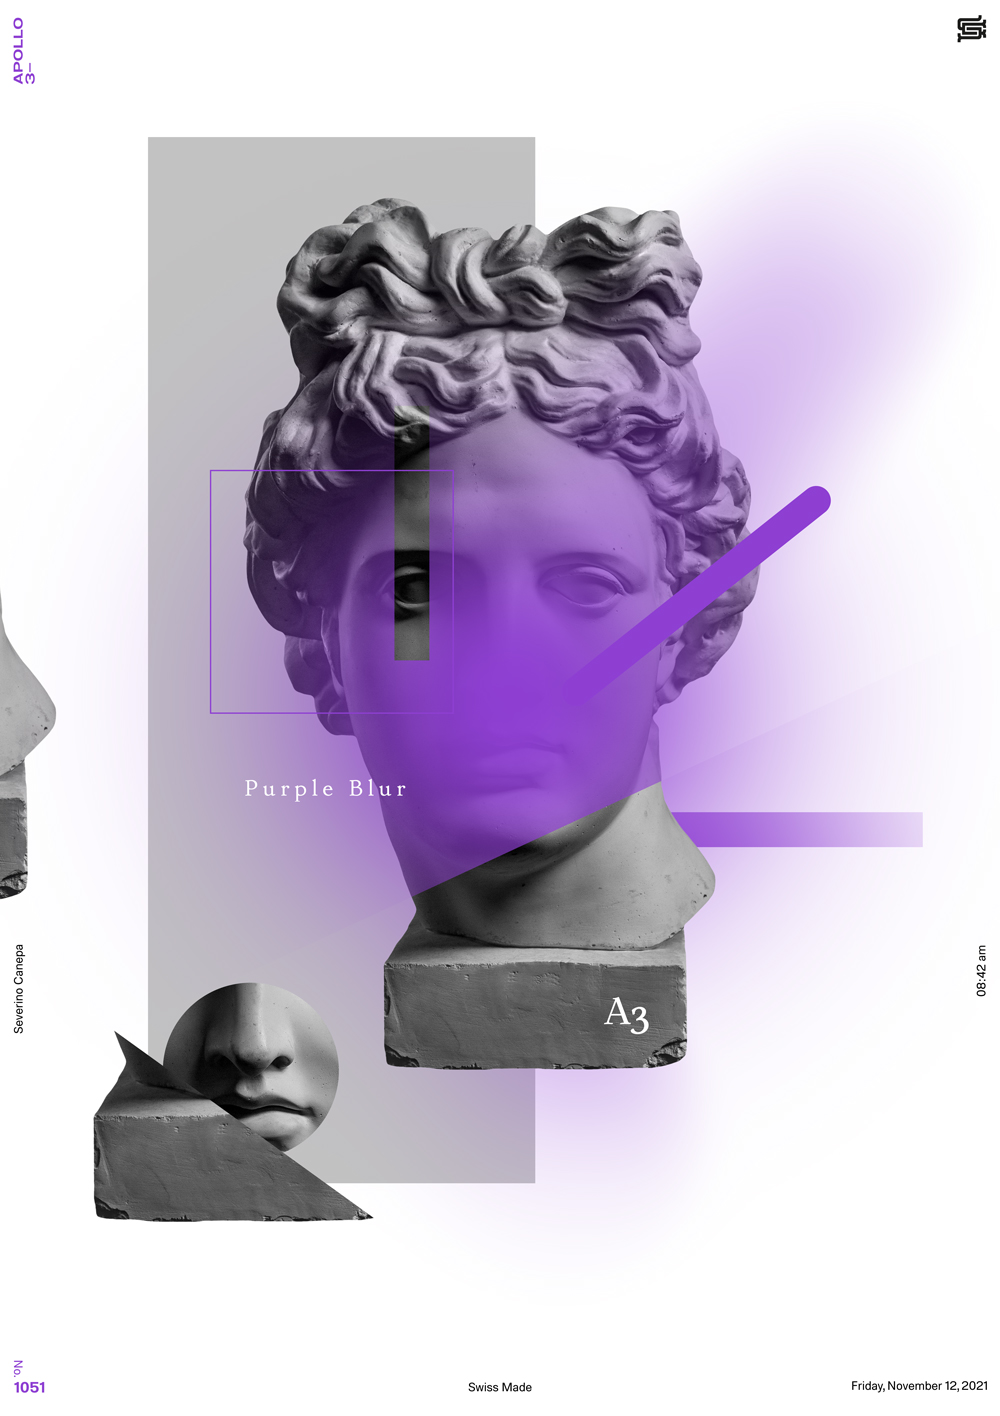 Digital artwork I created with gradient, Apollo's Statue, and typography